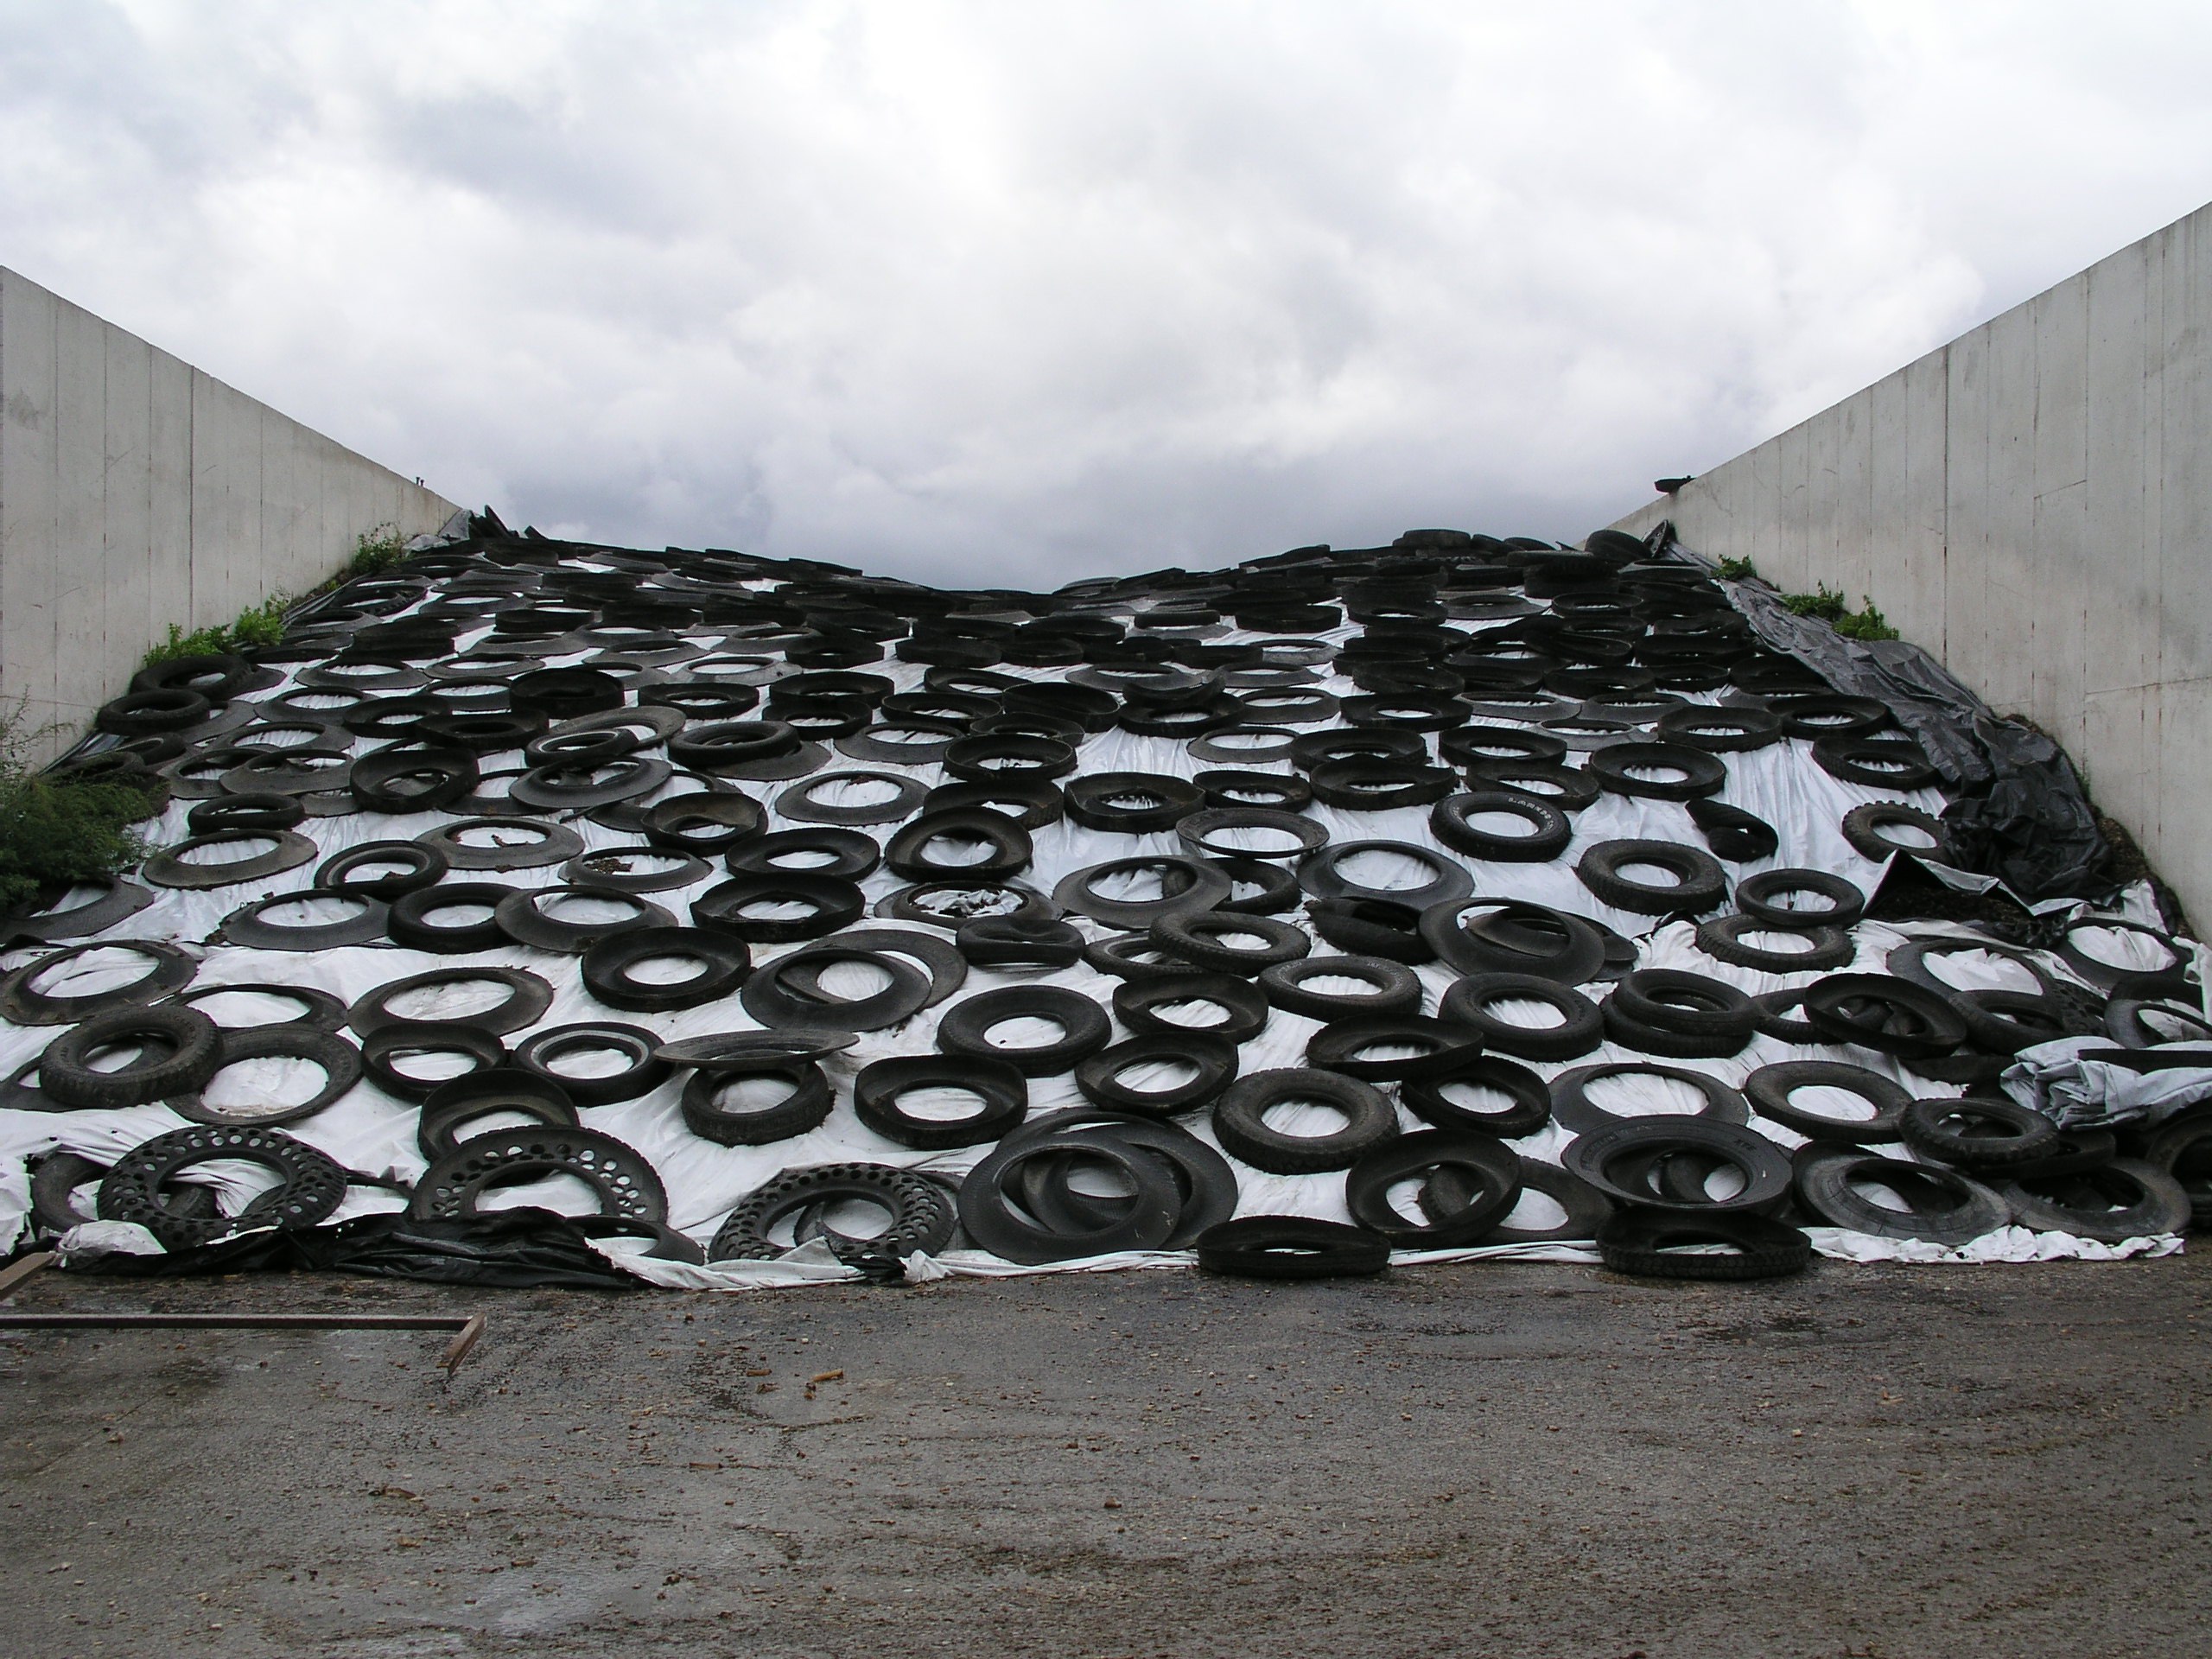 Feed bunker covered with tires